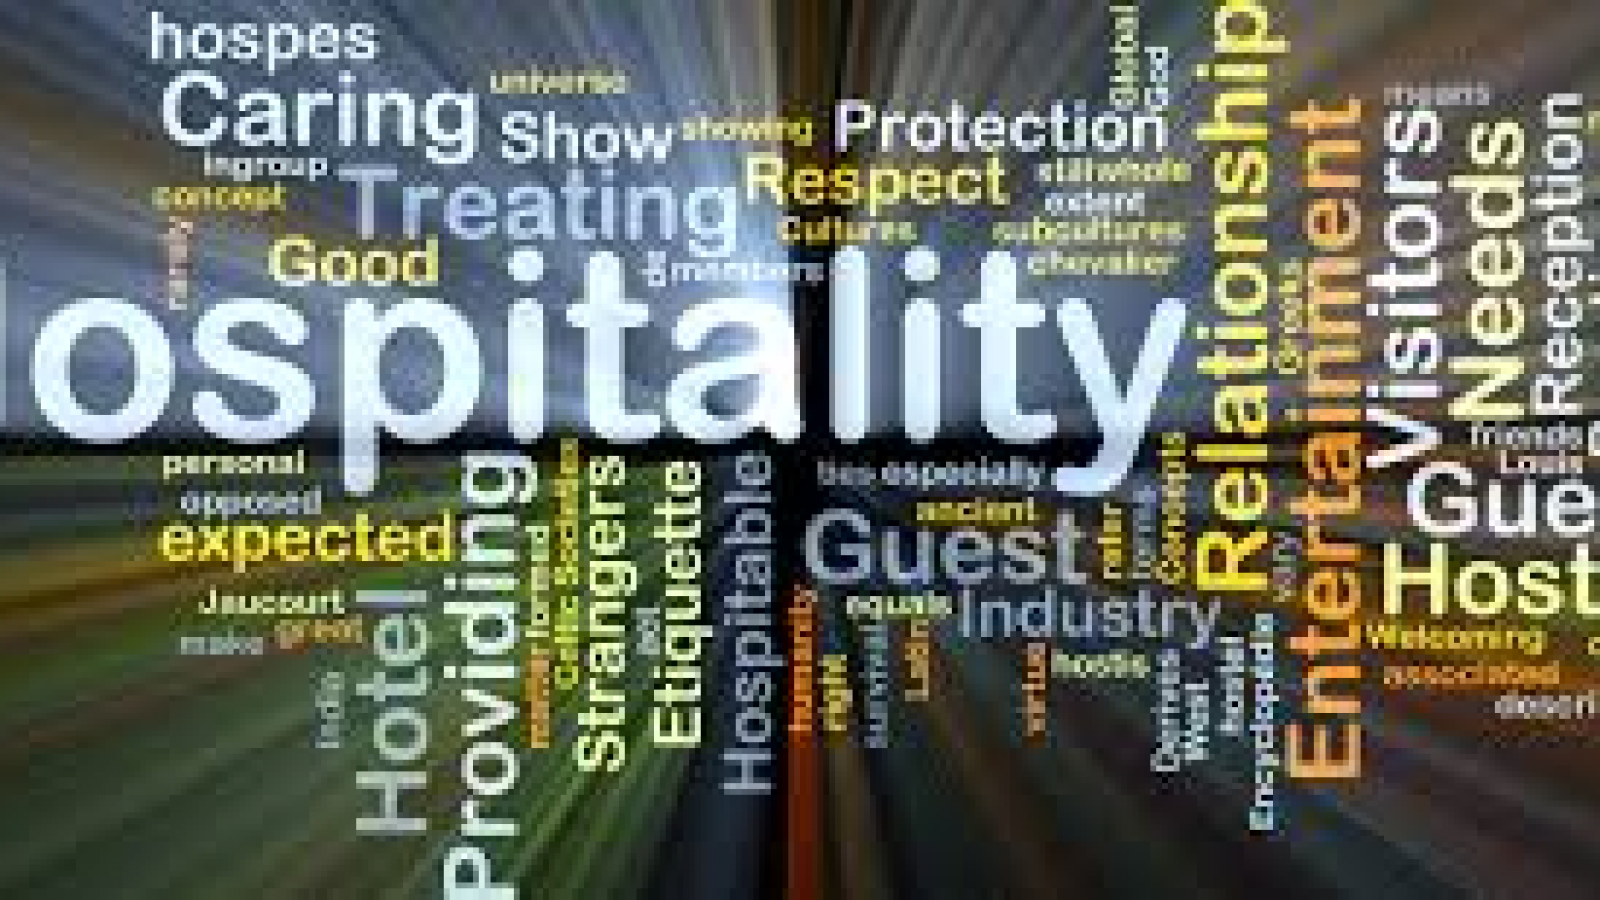 Ensuring Best Practice in the Hospitality Industry2